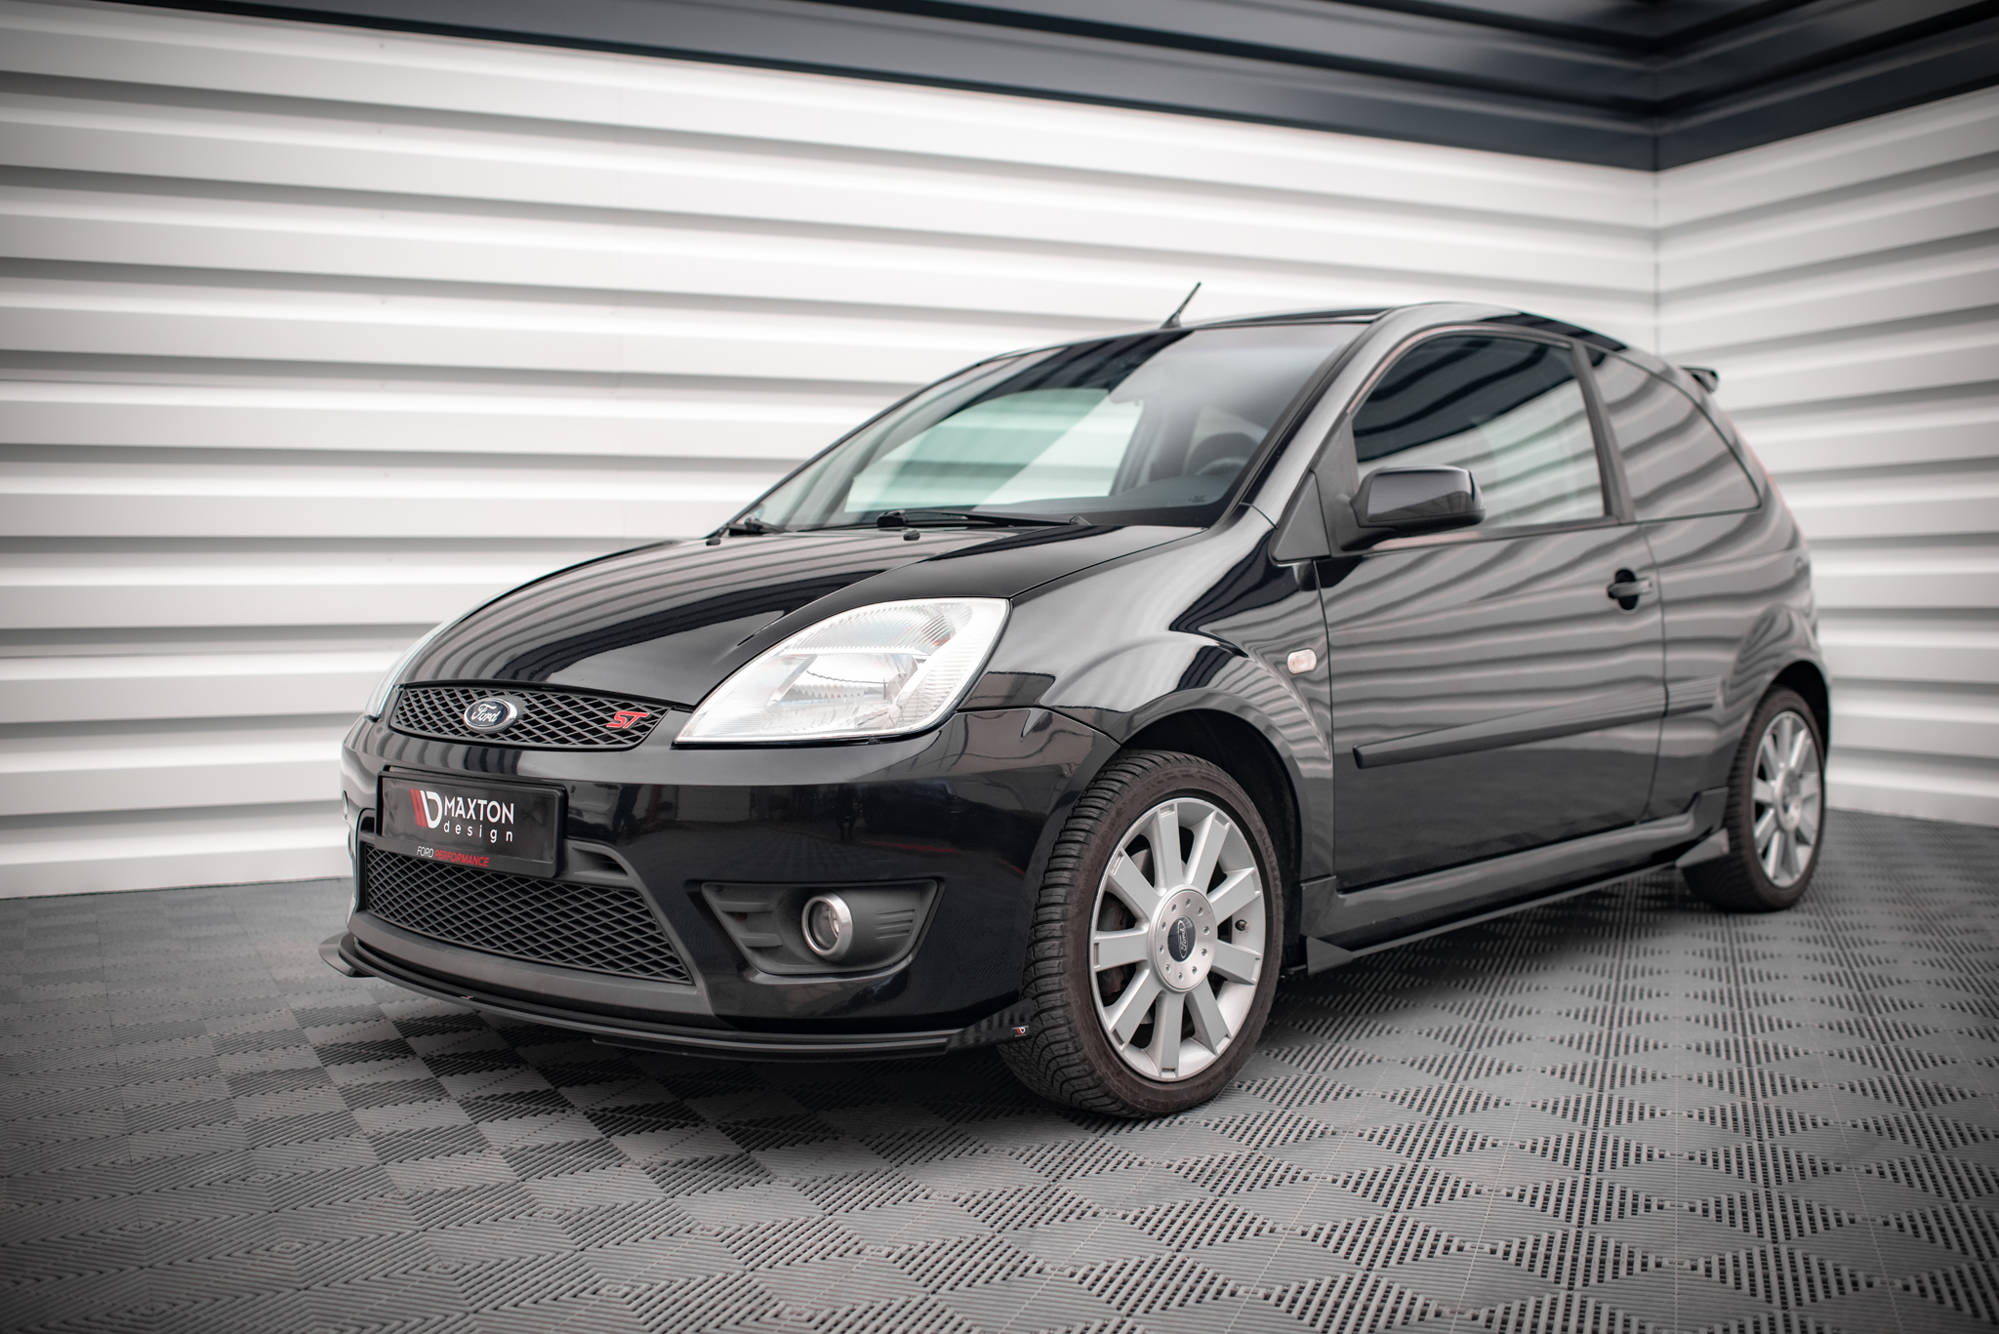 Front Flaps Ford Fiesta ST Mk6